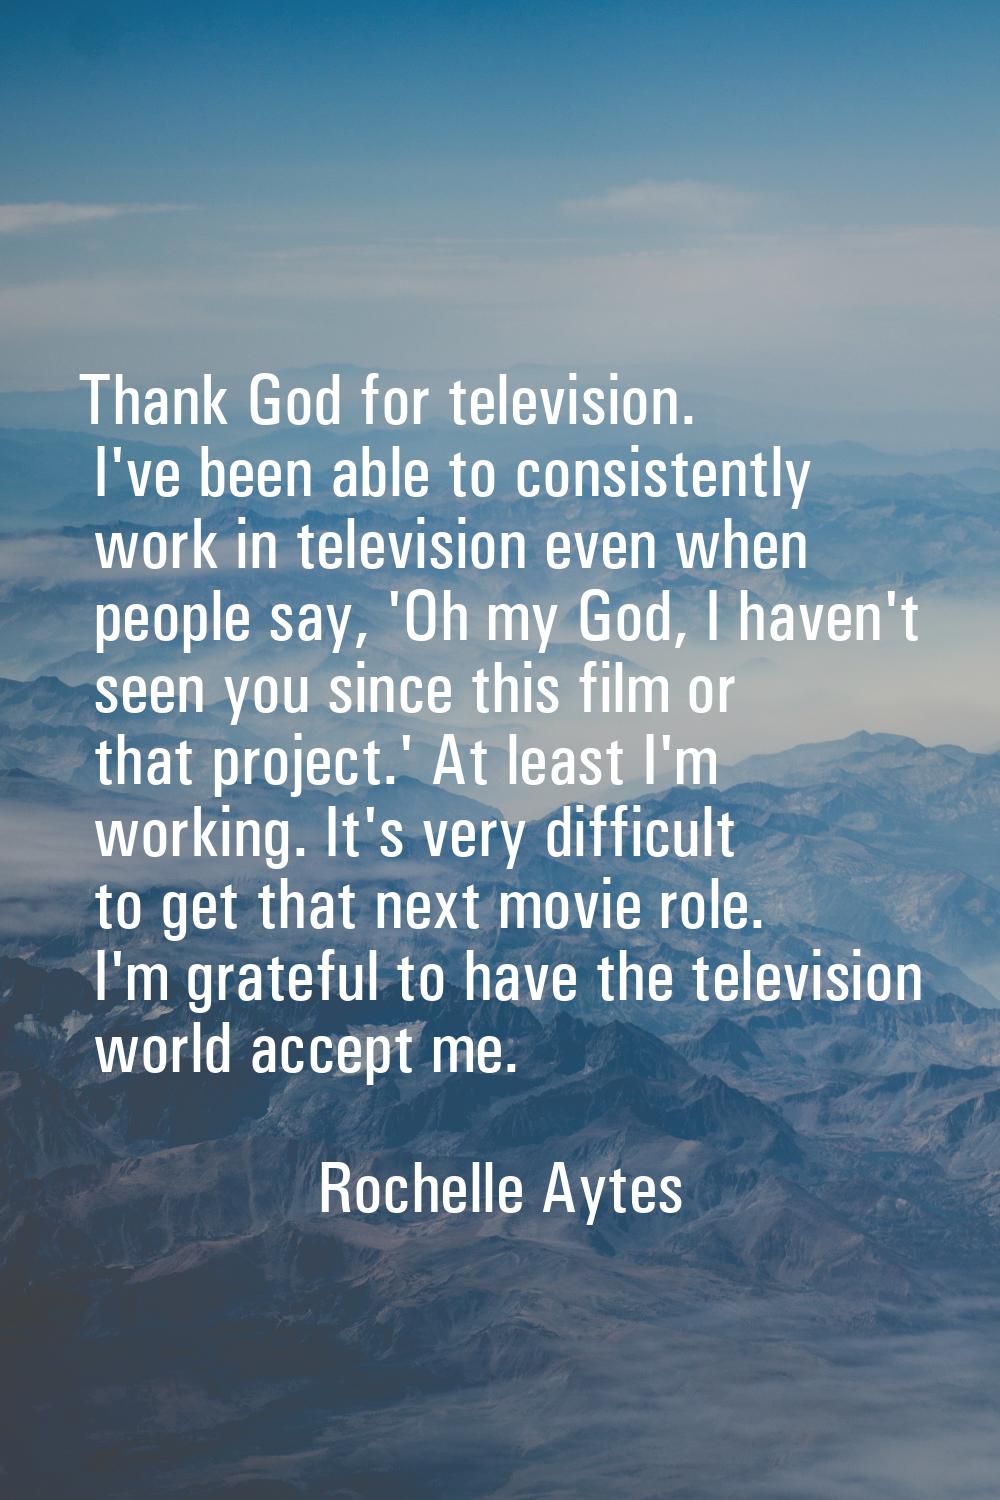 Thank God for television. I've been able to consistently work in television even when people say, '